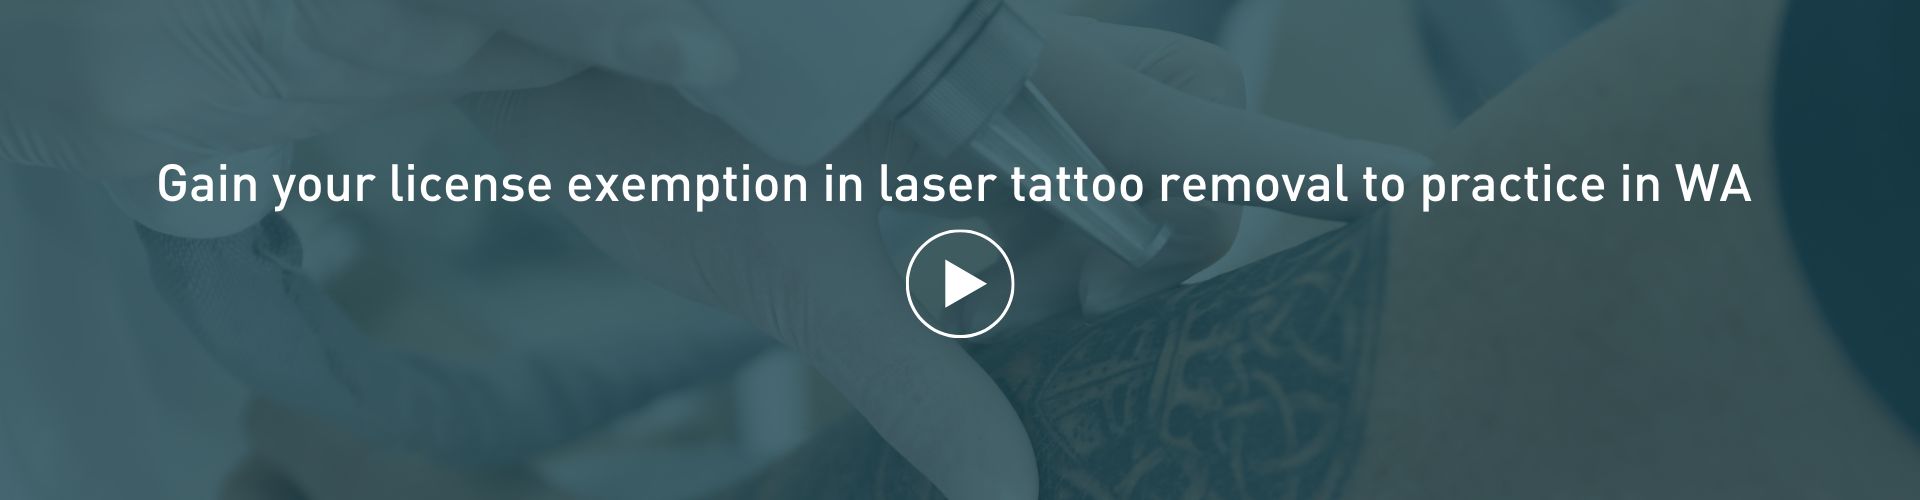 Laser Tattoo removal license